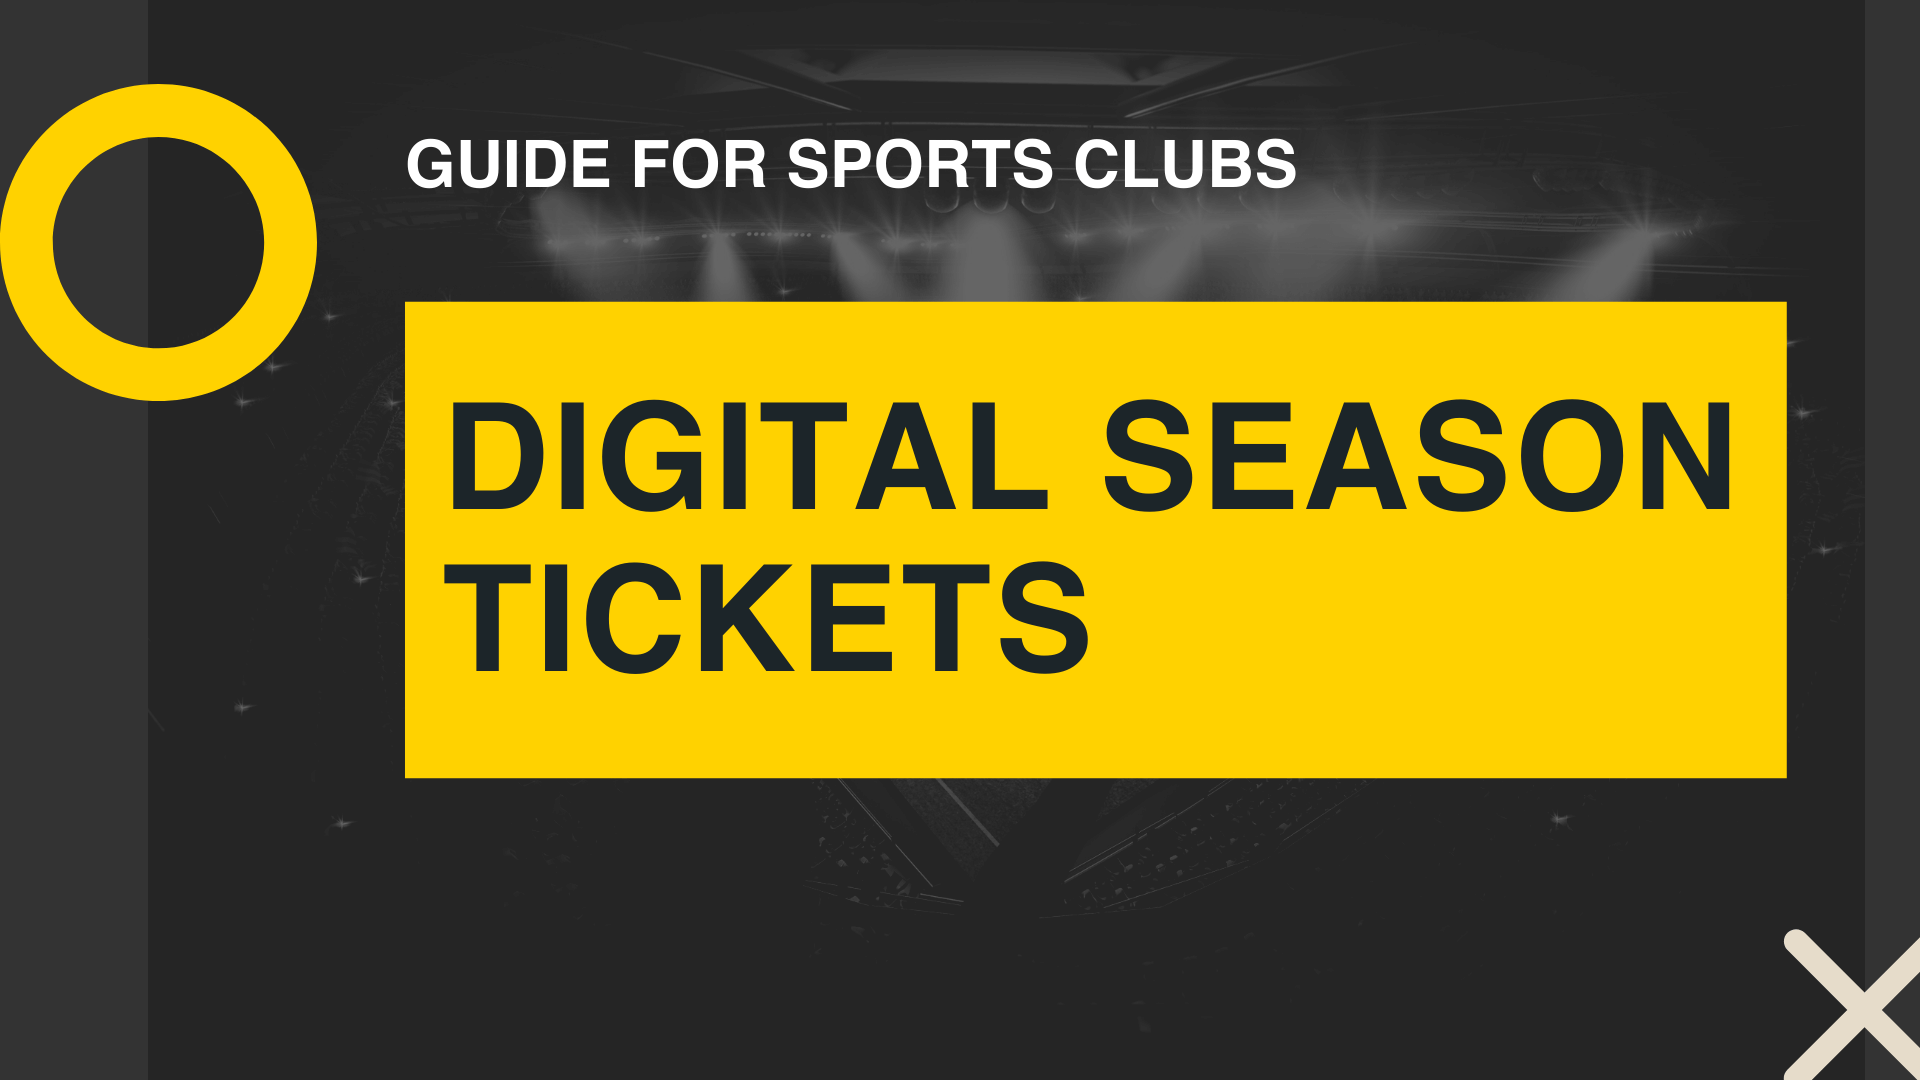 SEASON TICKET SALES FOR THE GROUP STAGE HAVE STARTED! 